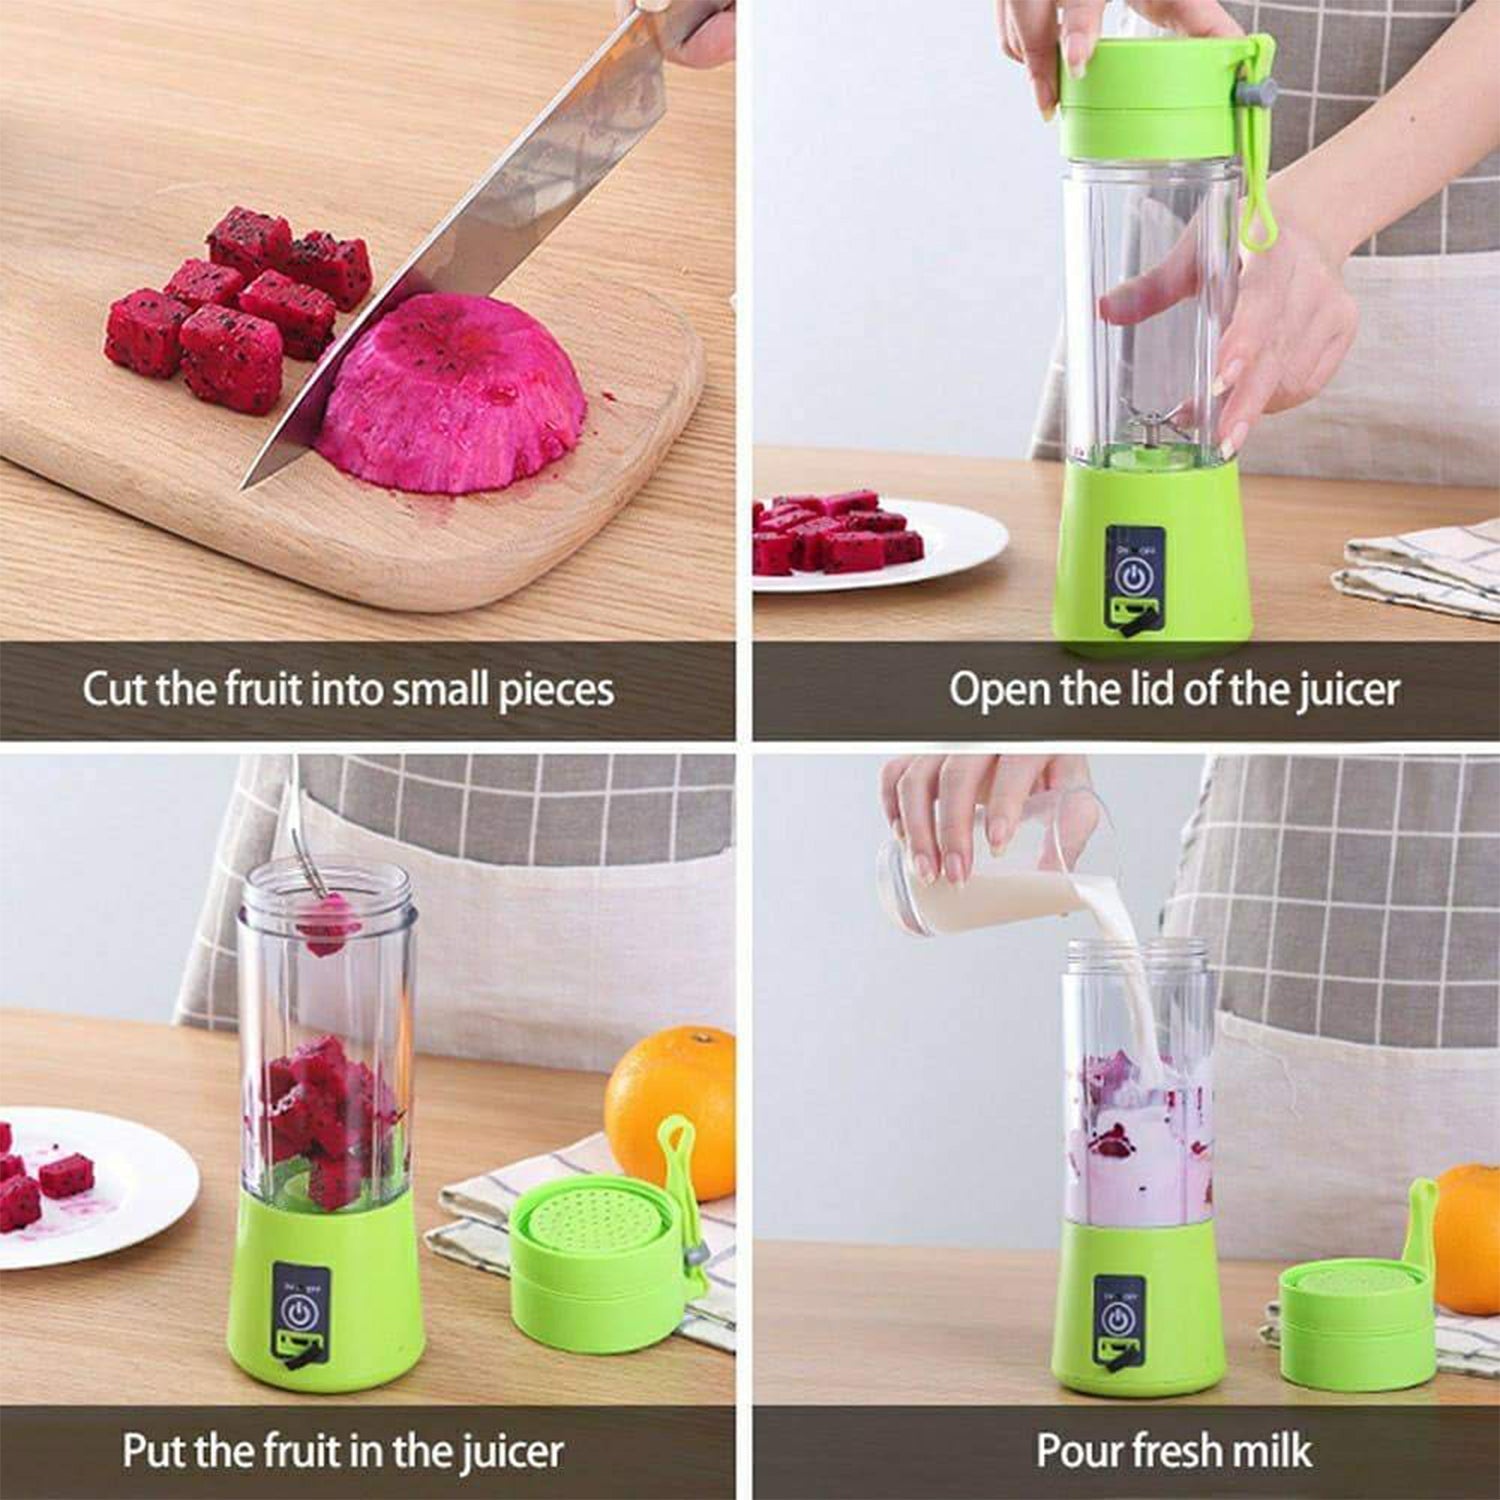 0133 A Usb Juicer 6 Blade used for making juices and beverages for drinking and serving purposes etc.